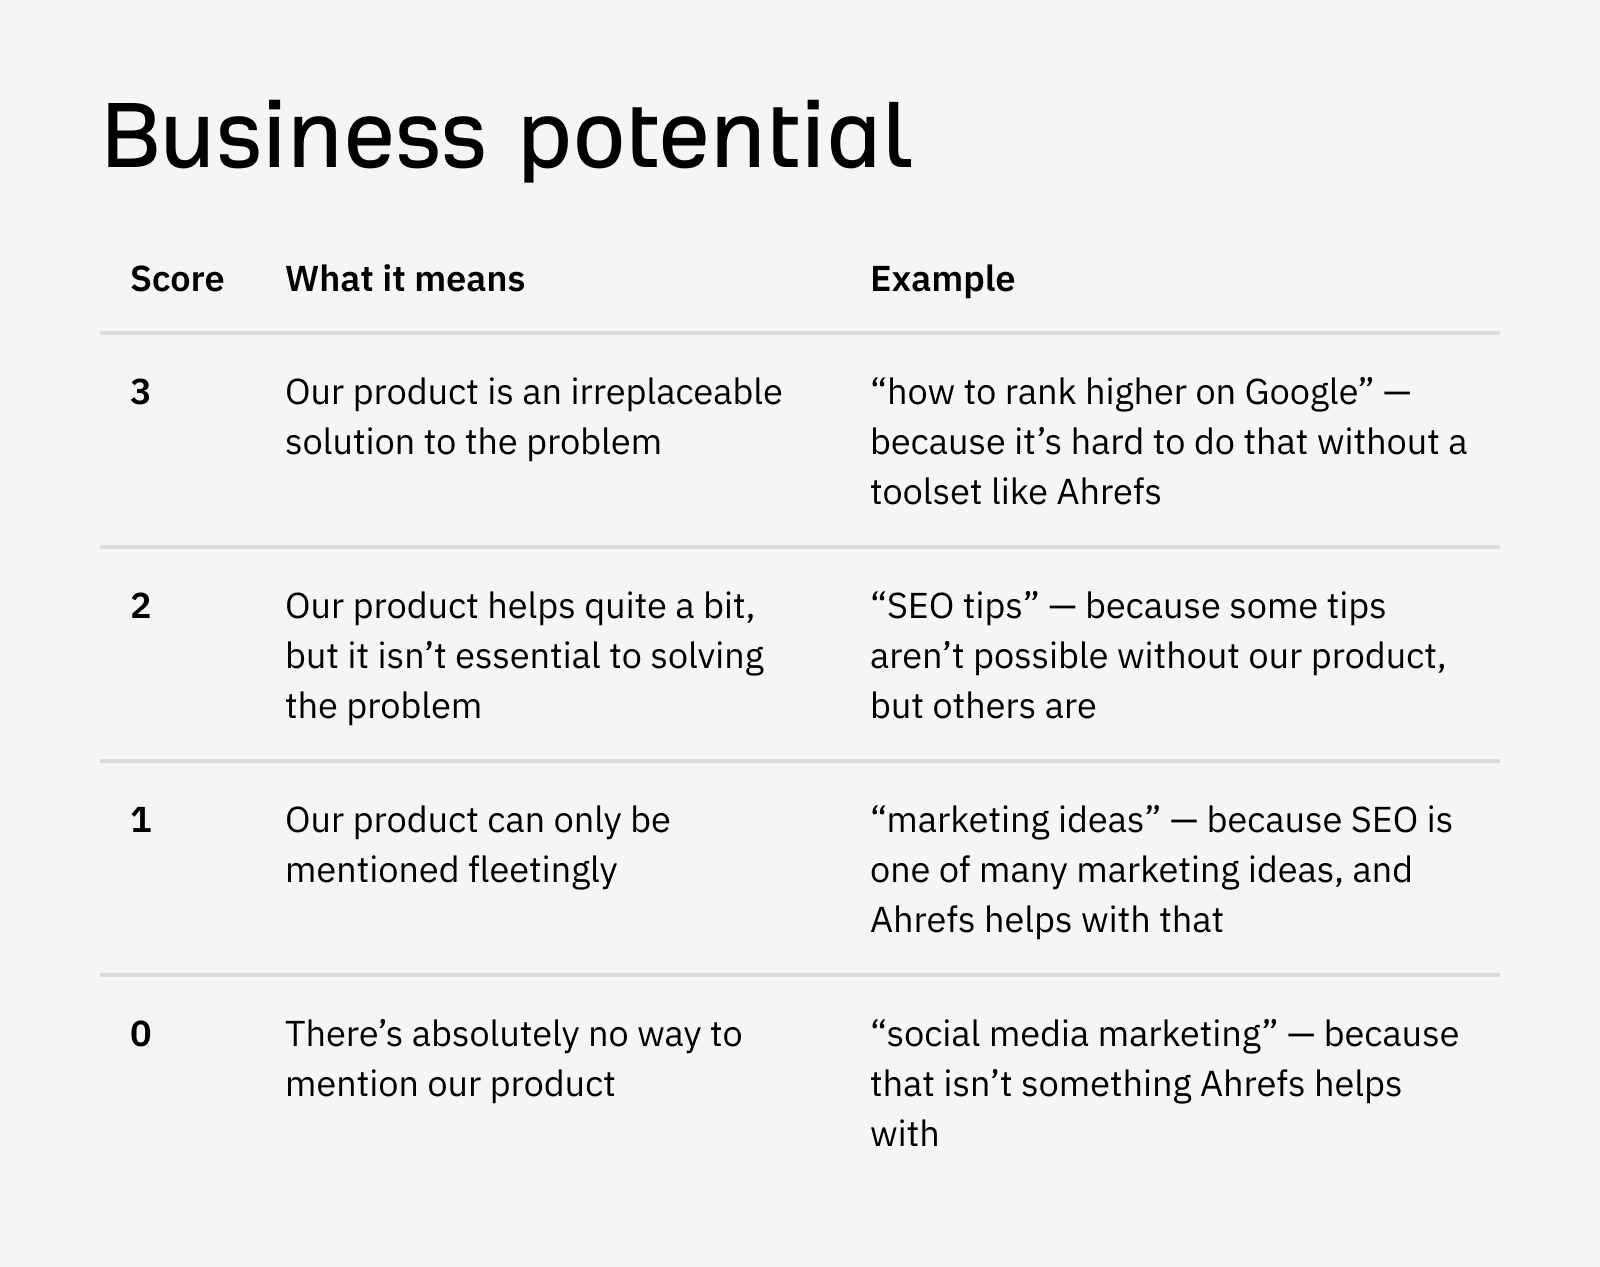 Business potential scoring chart